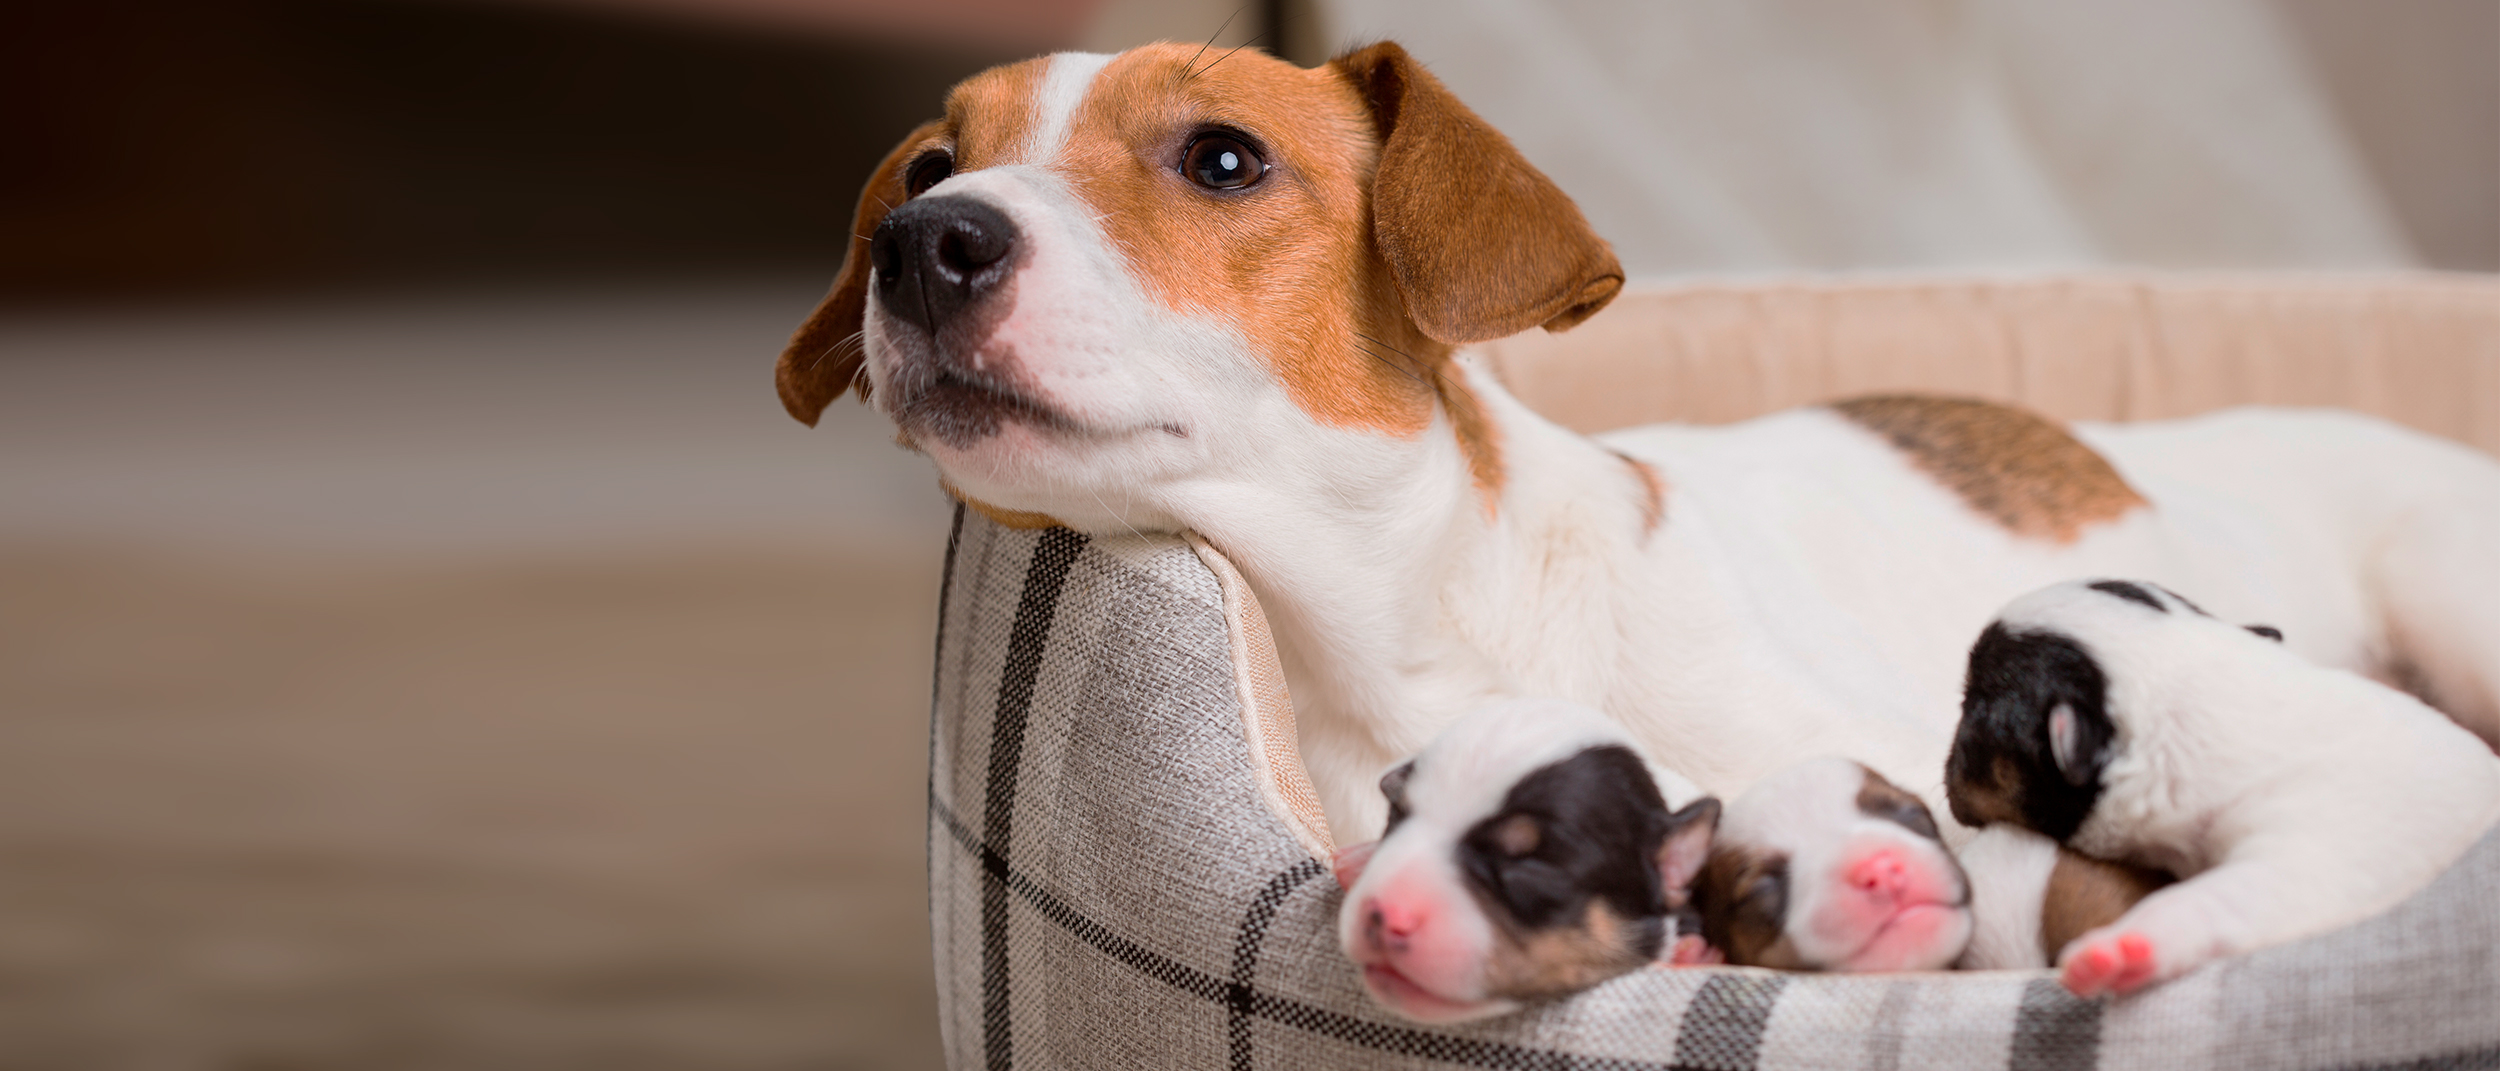 Adult Jack Russell lying down in a dog bed with her newborn puppies.